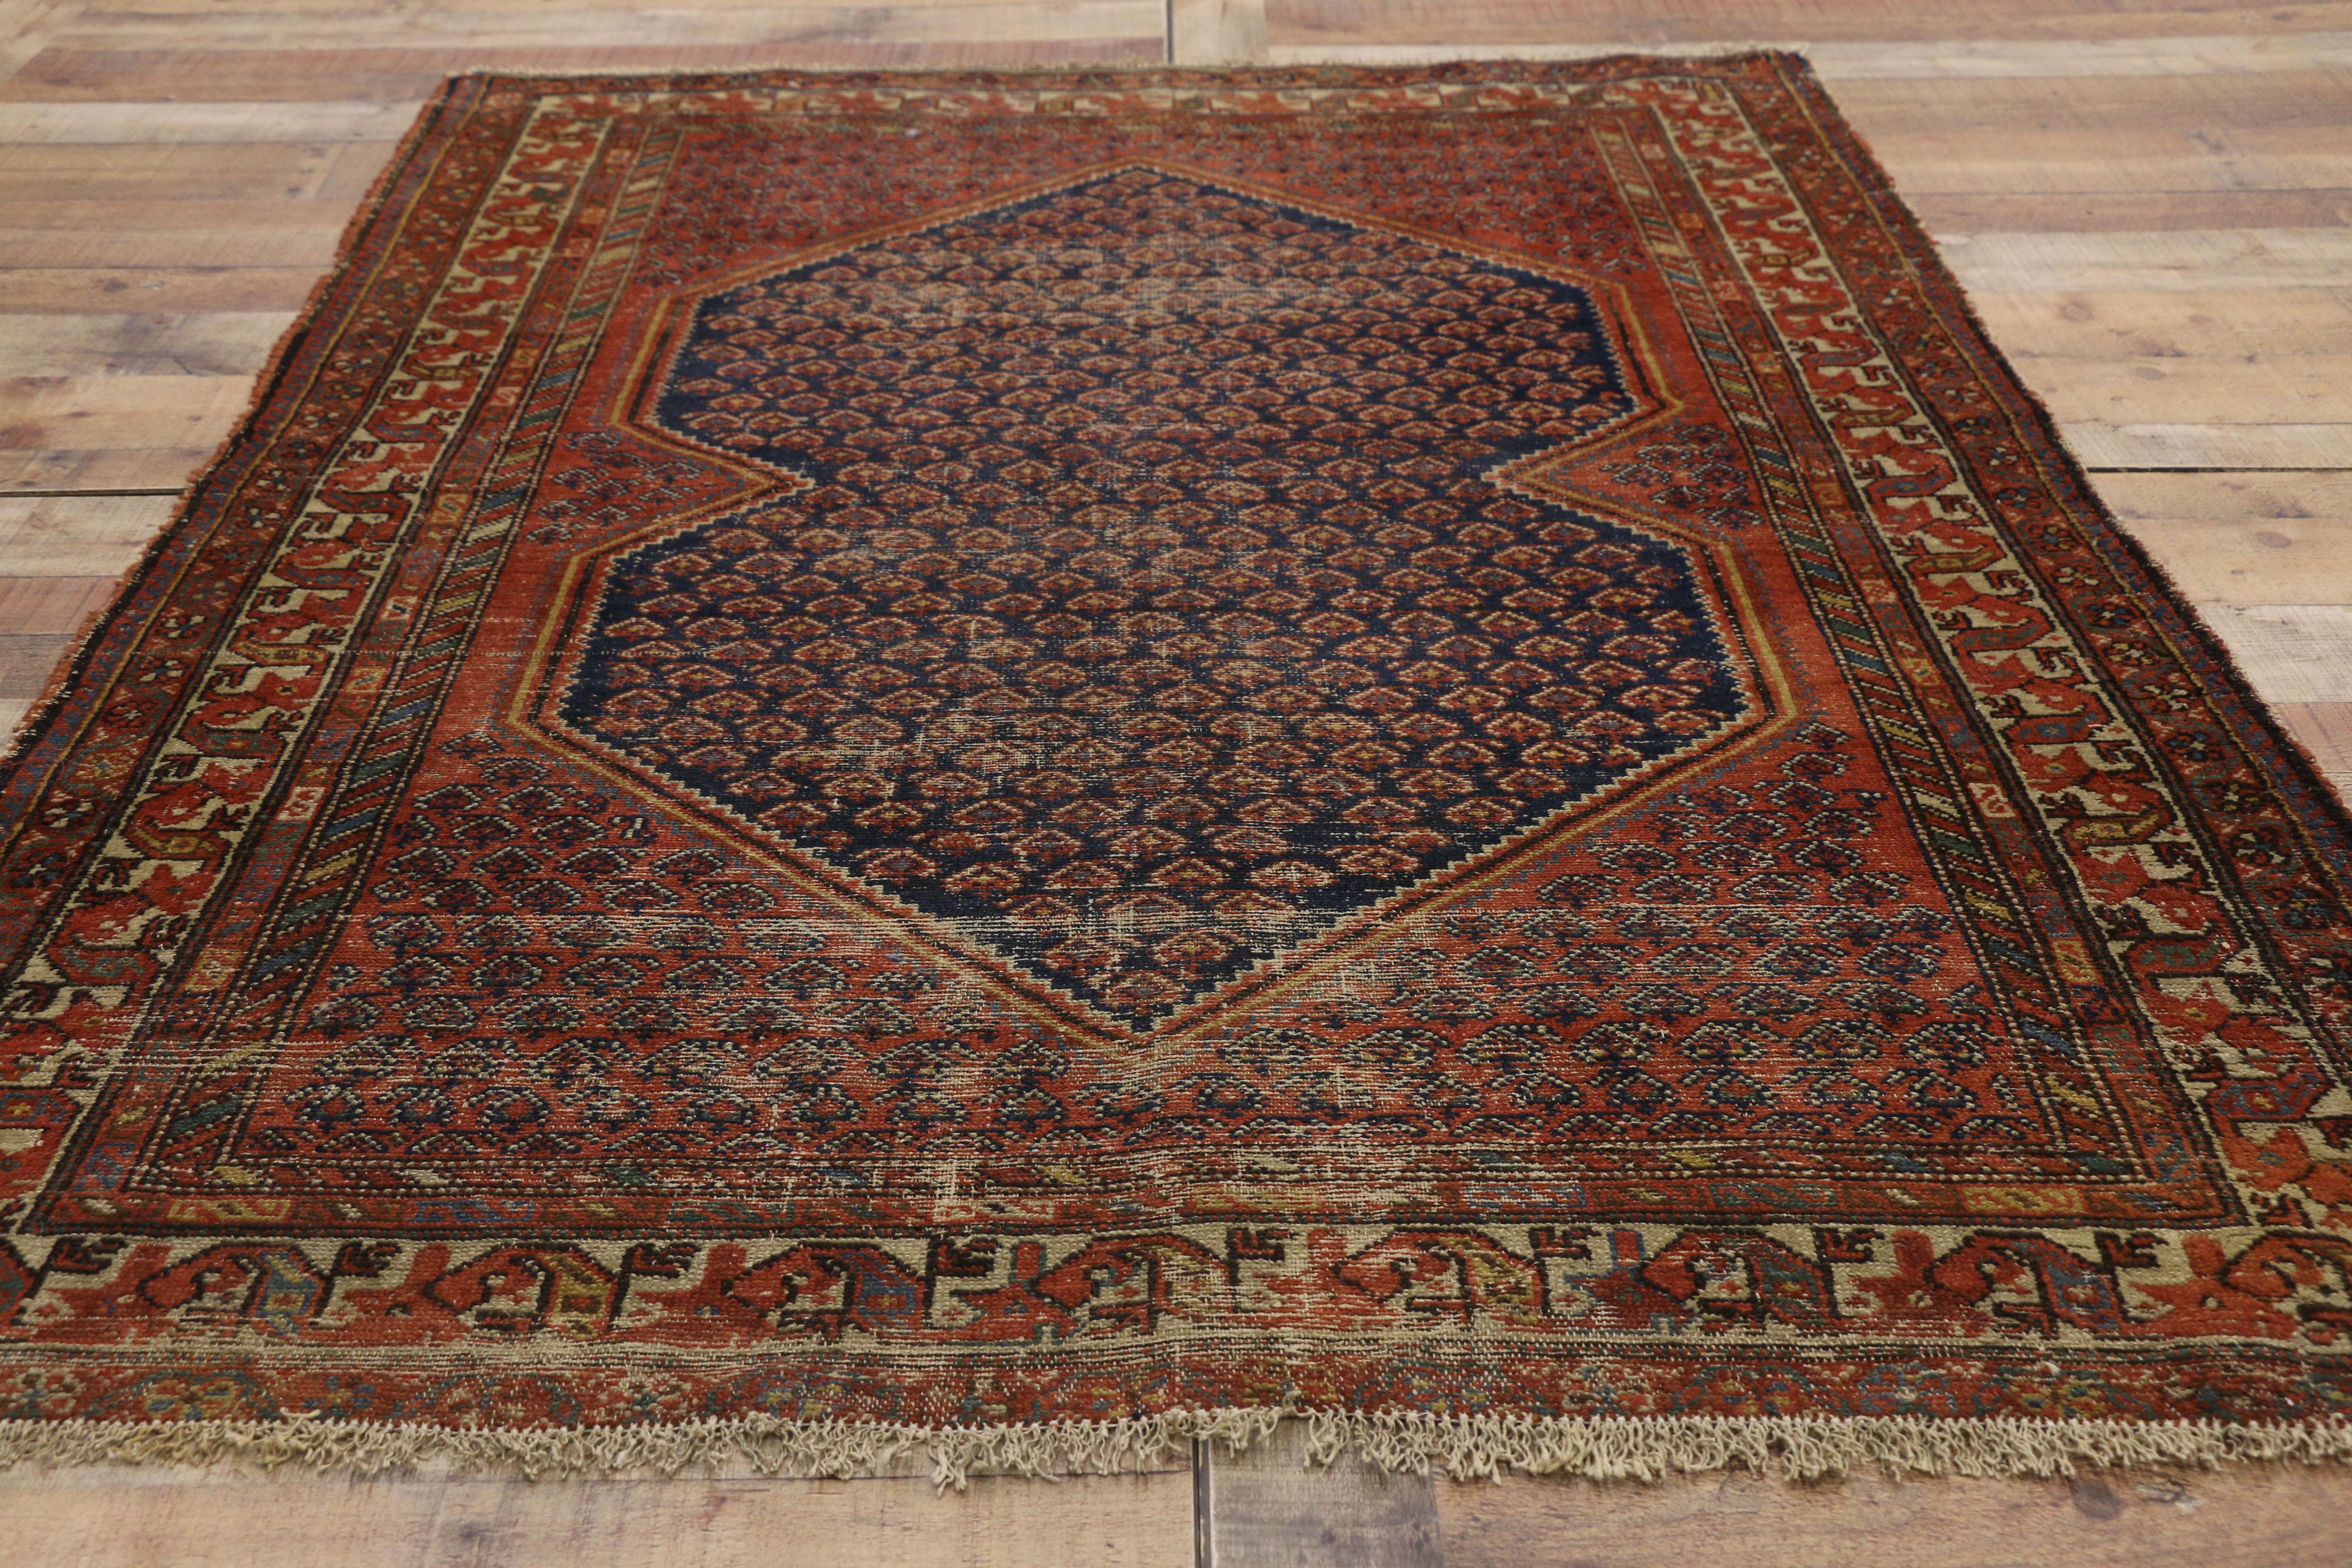 Distressed Antique Persian Malayer Rug with Rustic Artisan and Industrial Style 1